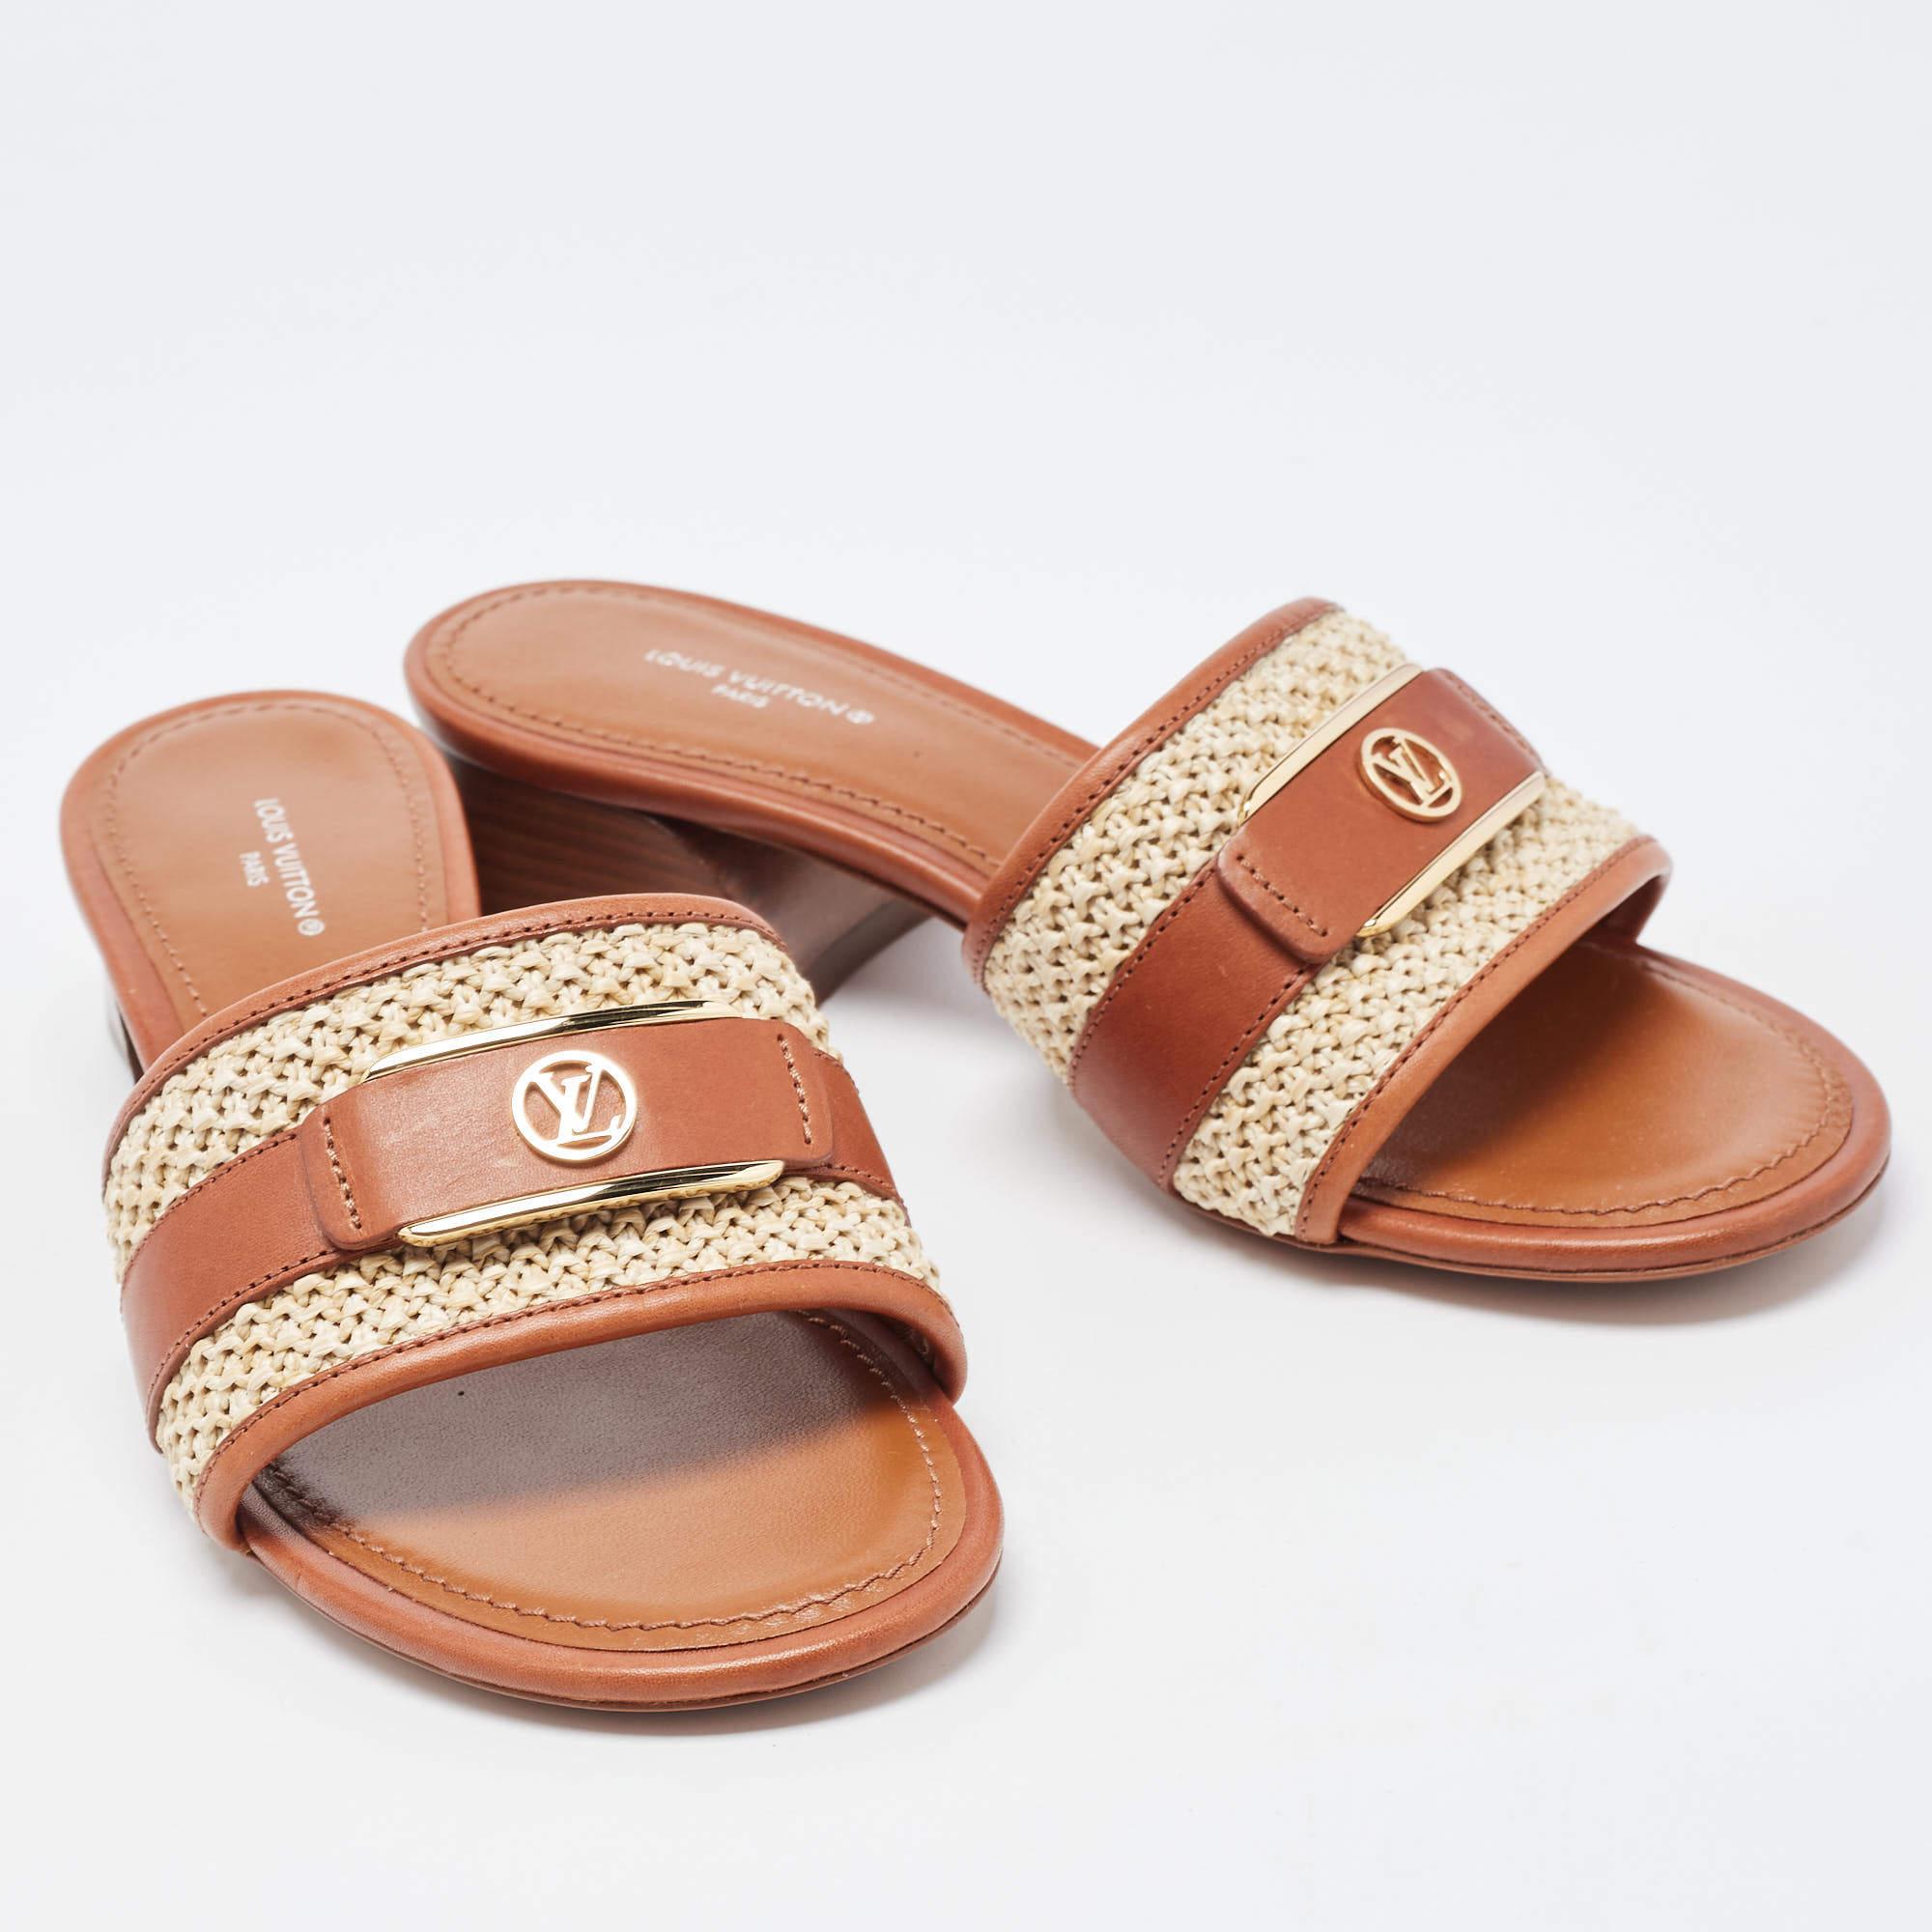 These sandals will frame your feet in an elegant manner. Crafted from quality materials, they display a classy design and comfortable insoles.

Includes
Original Box